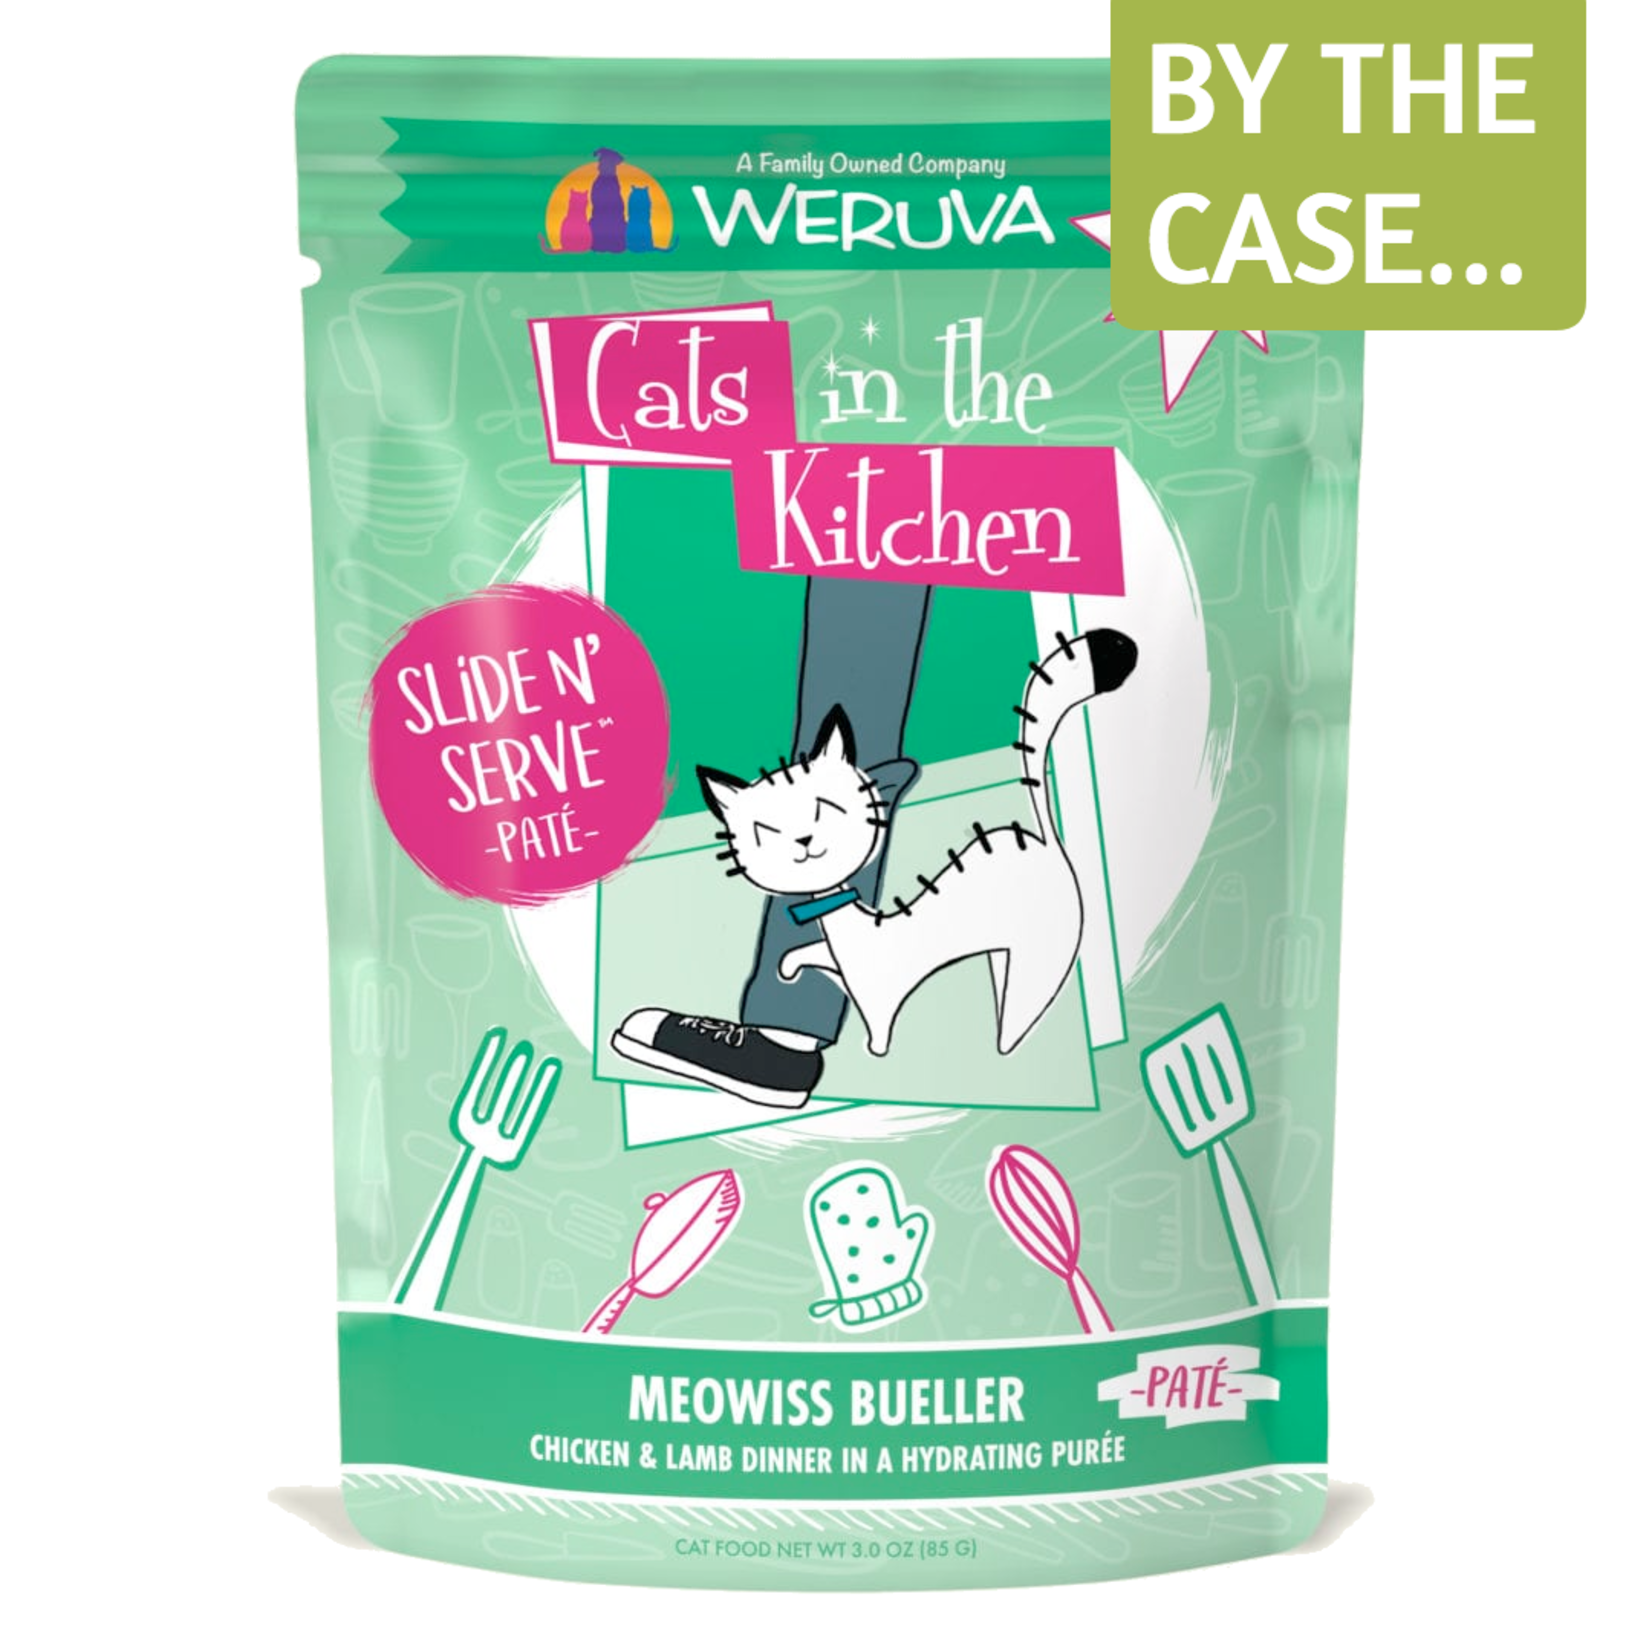 Weruva Weruva Wet Cat Food Cats in the Kitchen Slide and Serve Pate Pouch Meowiss Bueller Chicken and Lamb Dinner 3oz